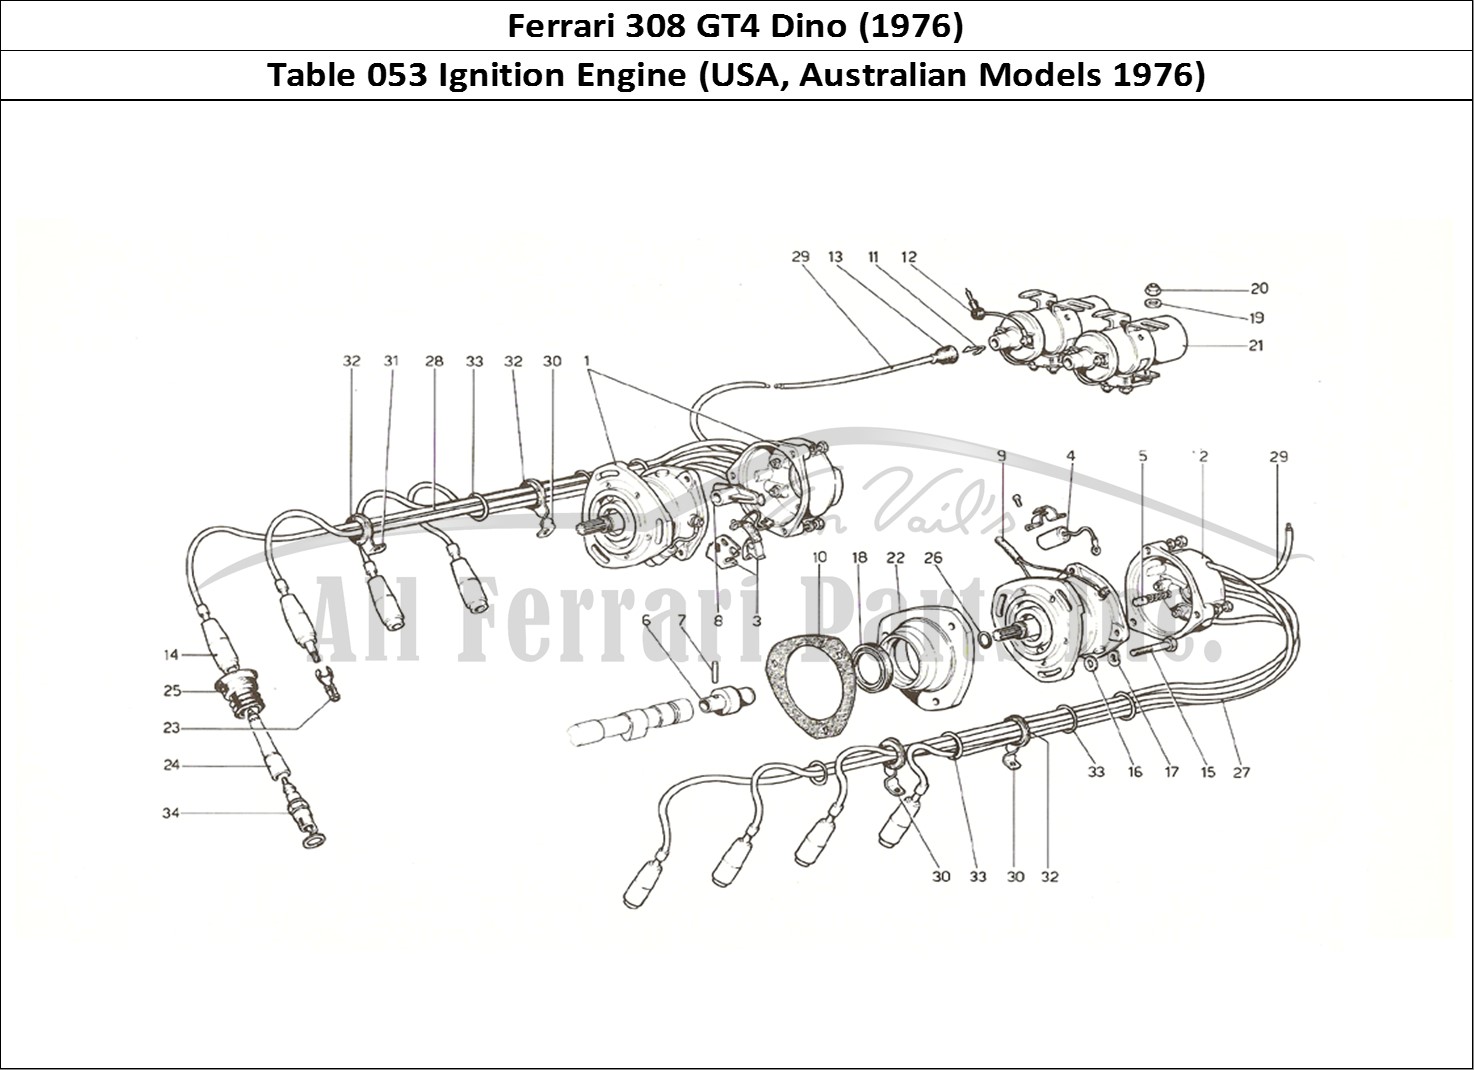 Ferrari Parts Ferrari 308 GT4 Dino (1976) Page 053 Engine Ignition (US and A